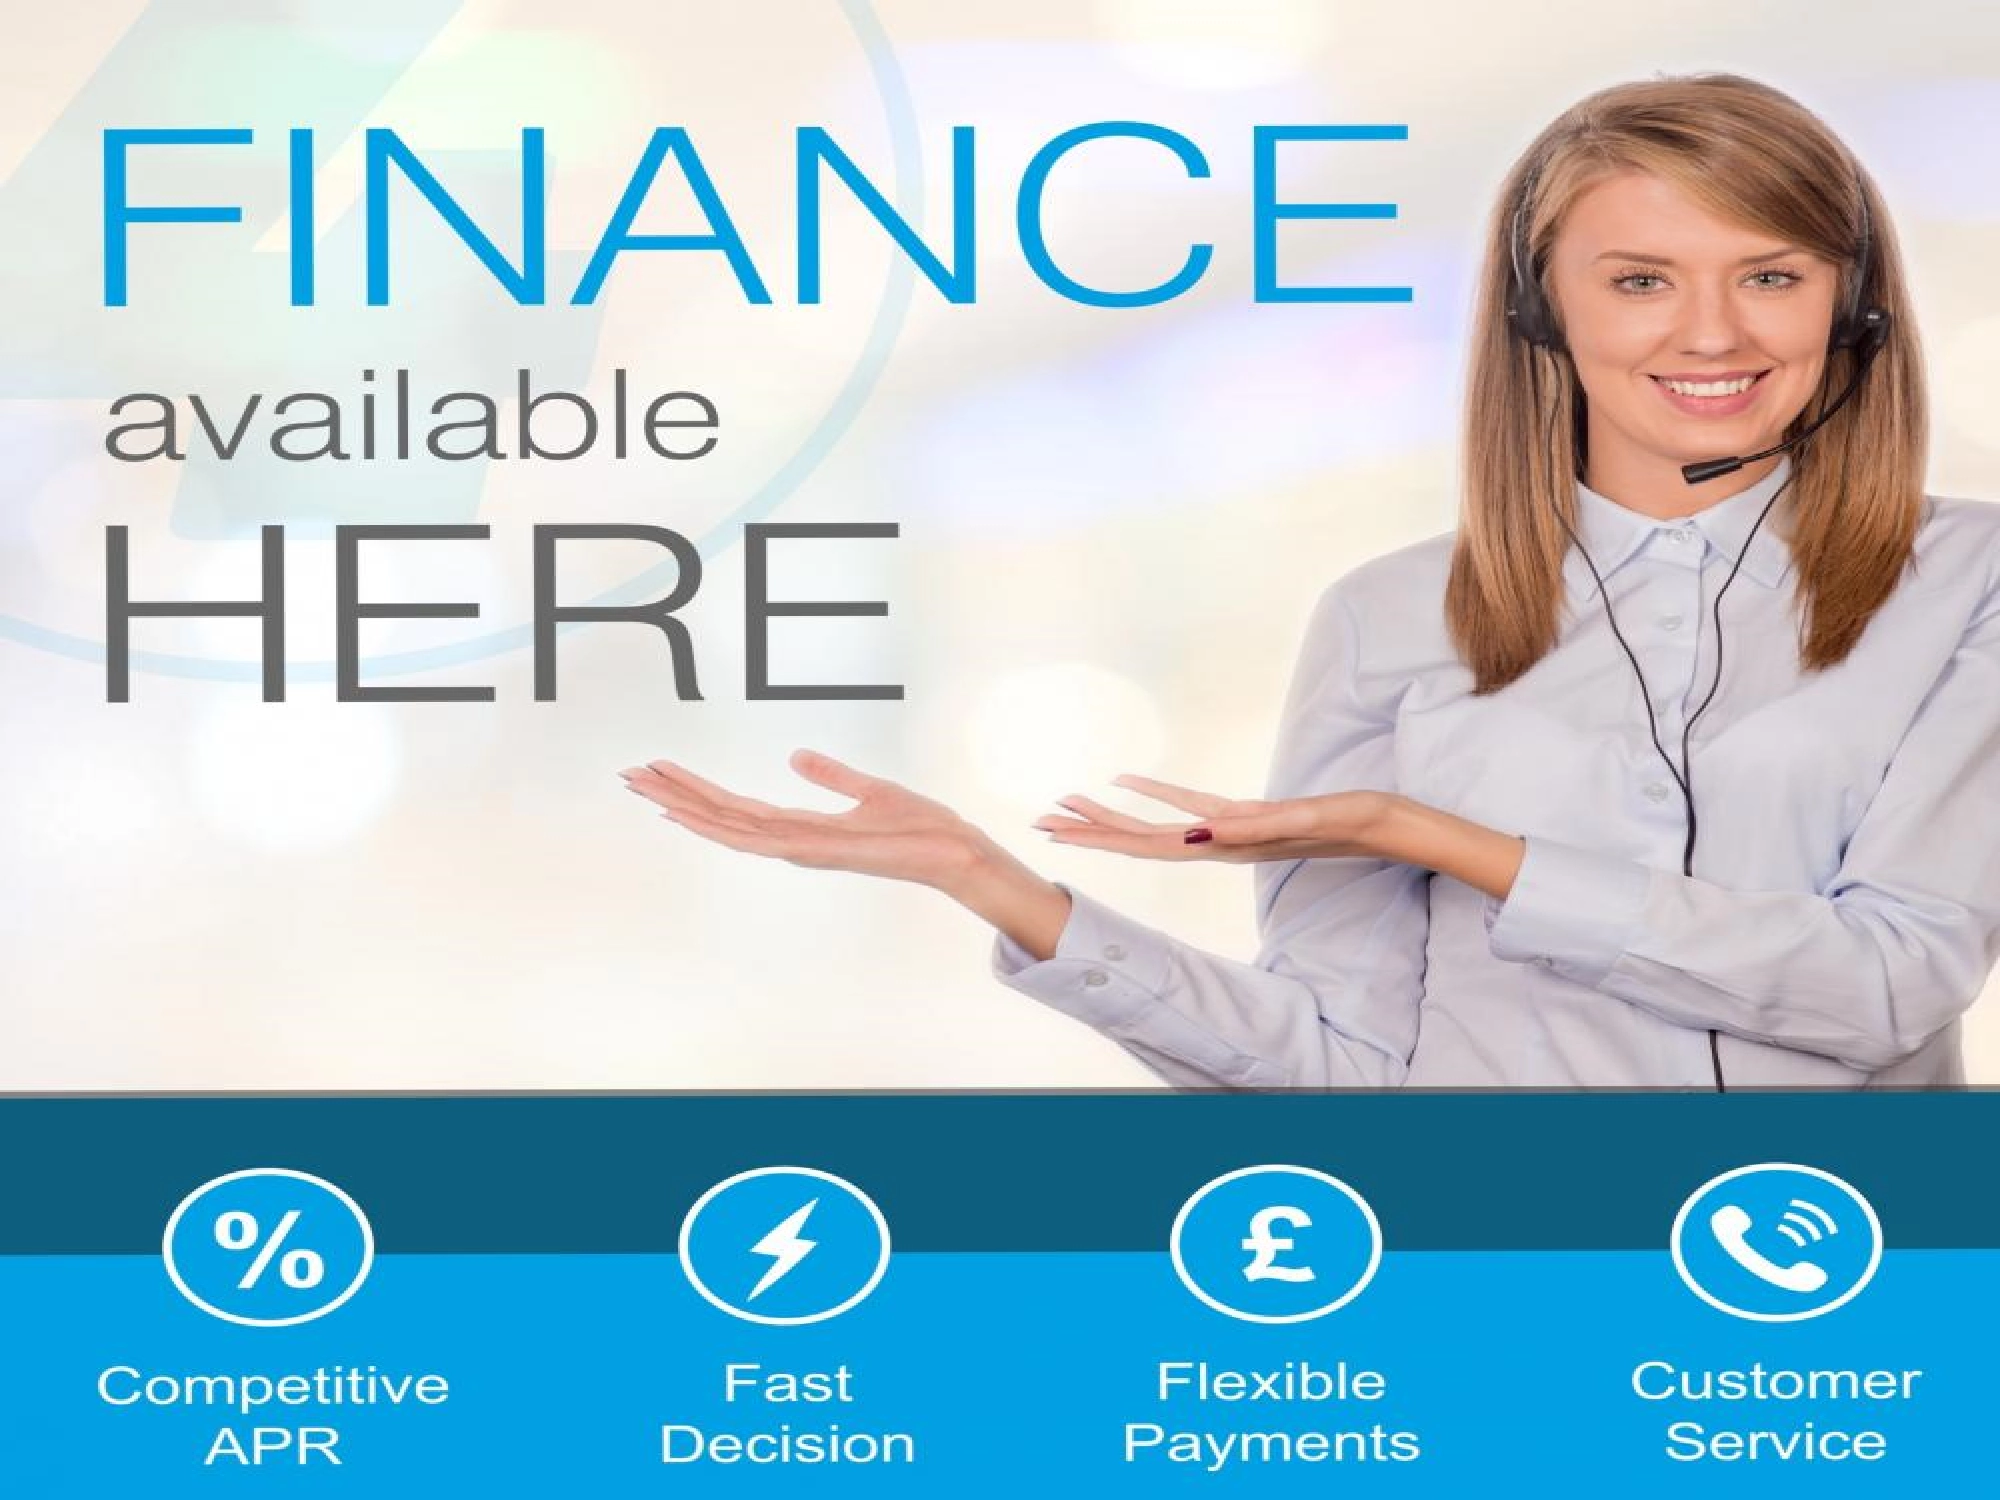 finance available